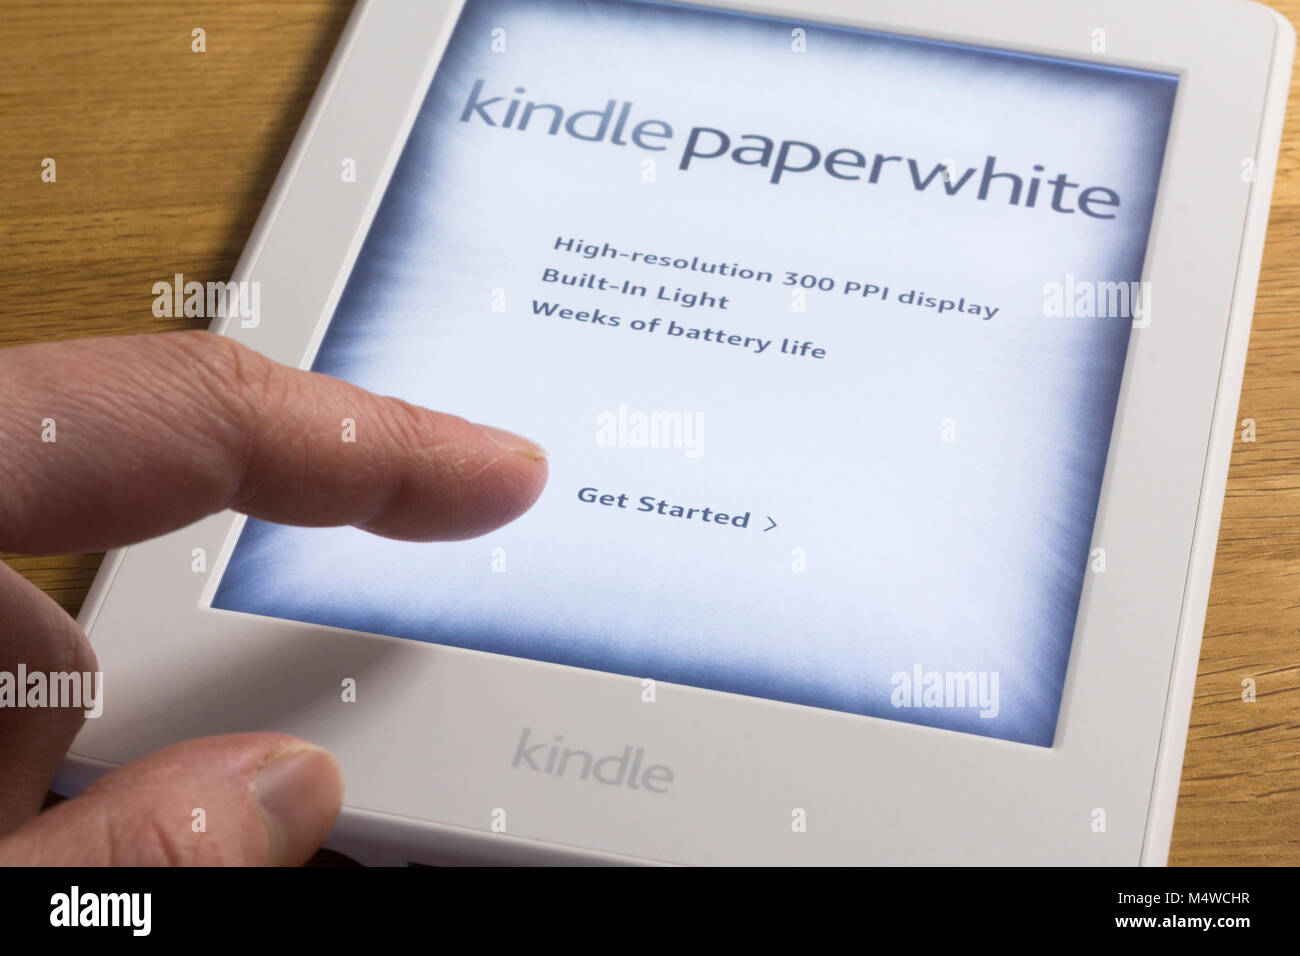 https://c8.alamy.com/comp/M4WCHR/a-new-user-getting-started-with-a-kindle-paperwhite-ebook-reader-M4WCHR.jpg